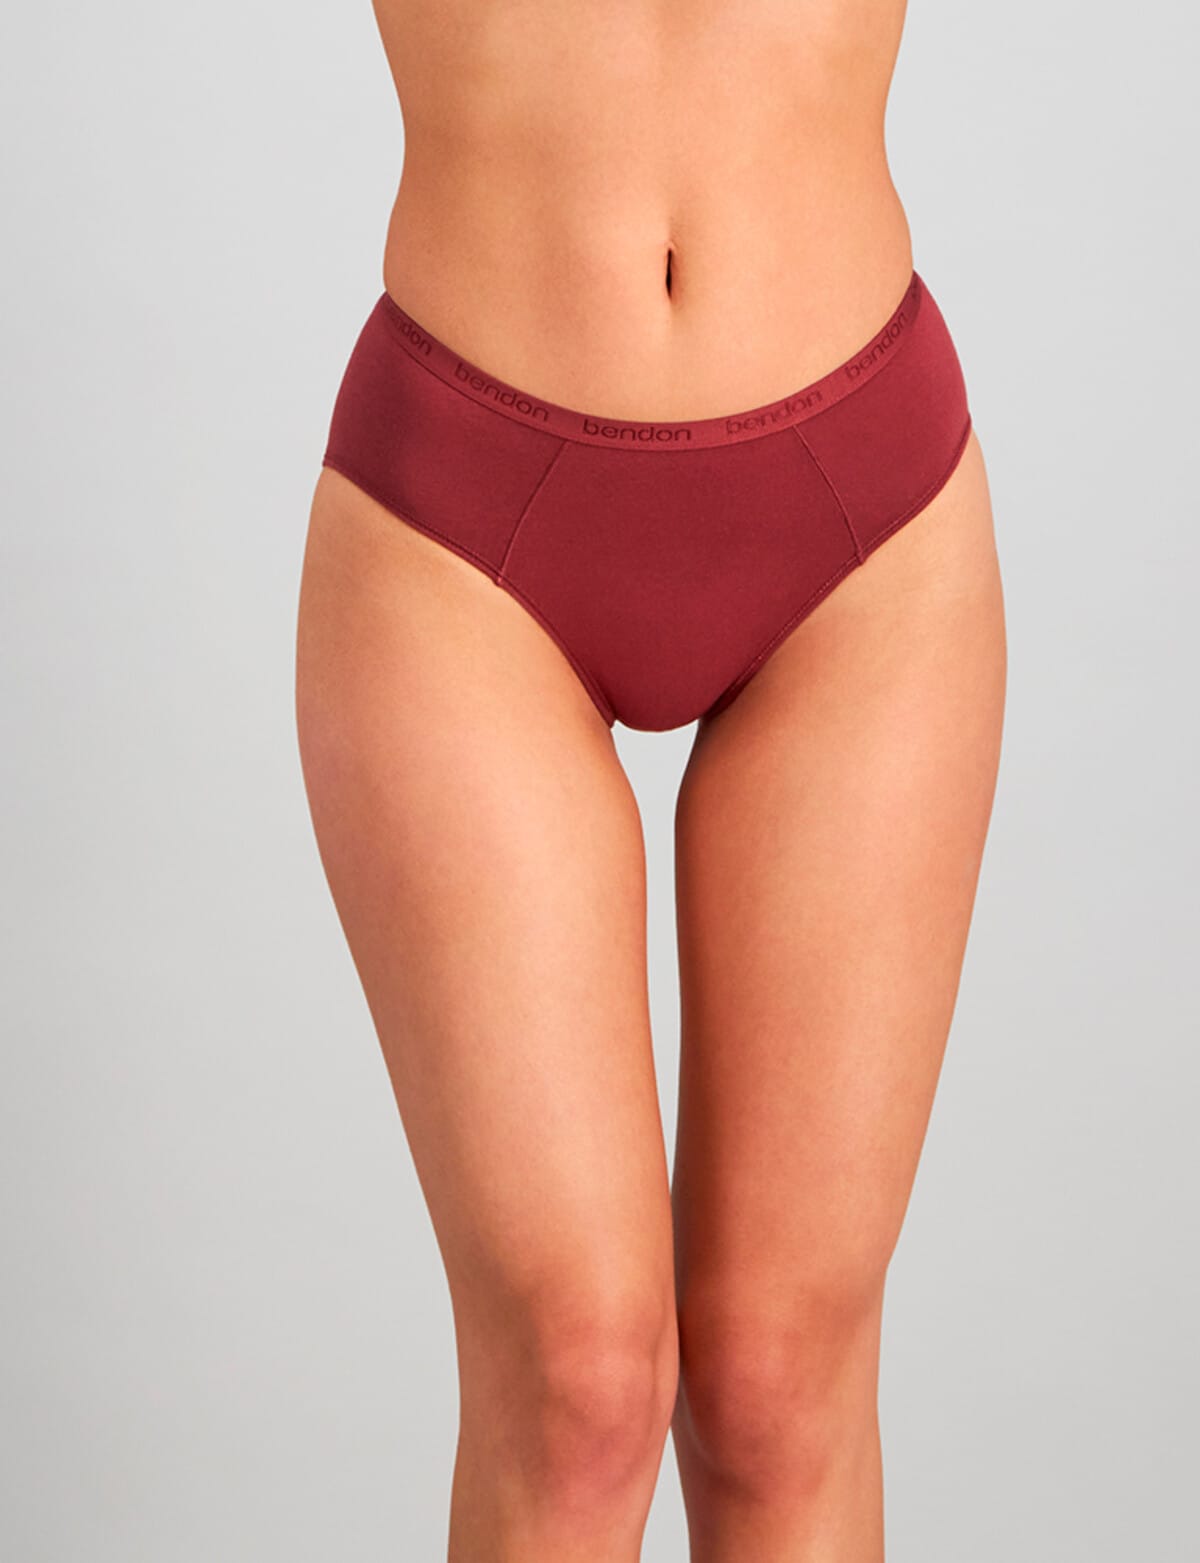 Bendon Women's Body Cotton High Cut Briefs 2-Pack - Oxblood Red/Pearl Blush